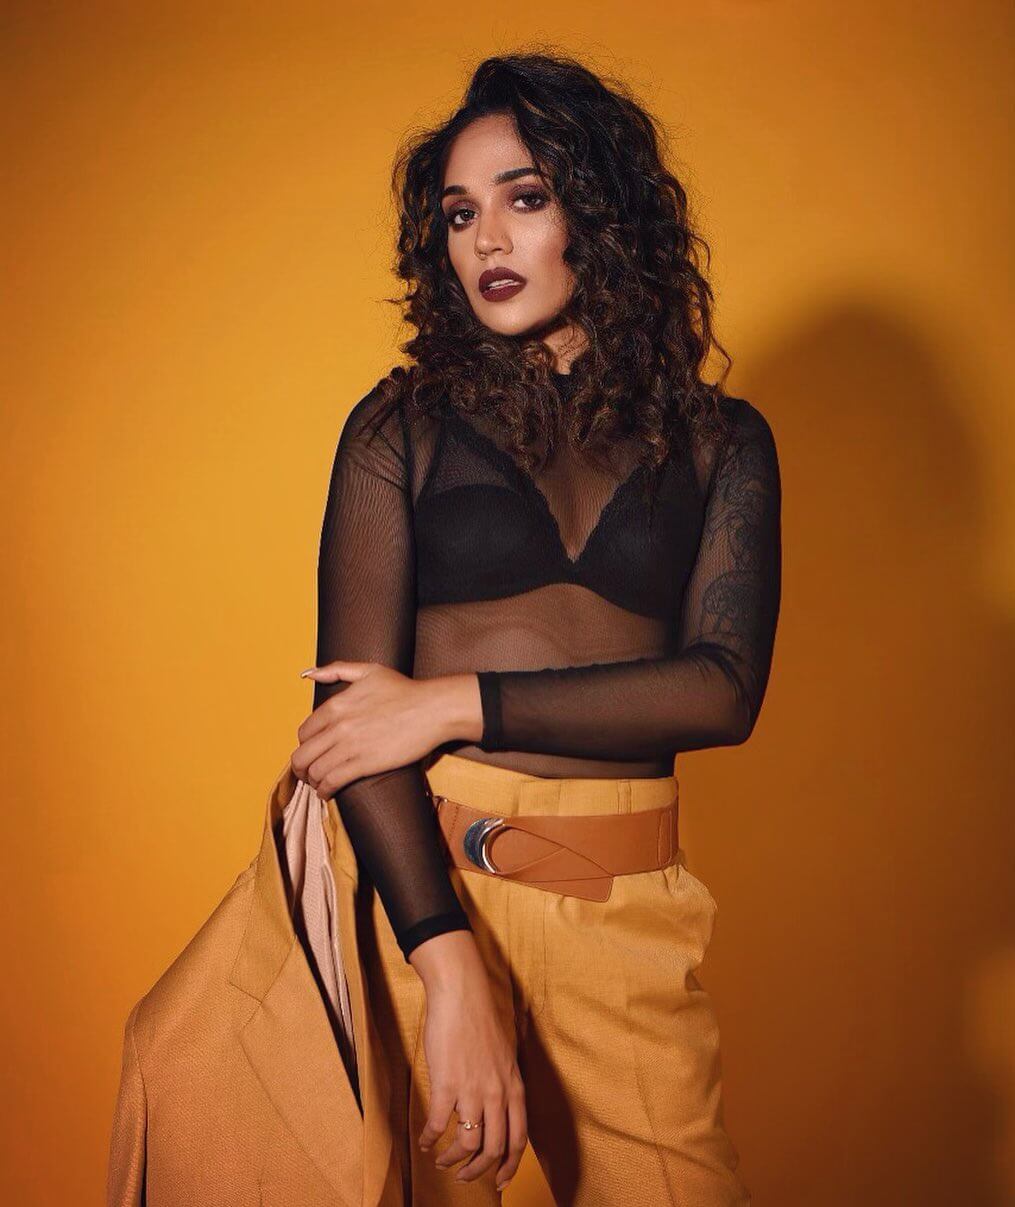 Hot Bae Mumtaz Sorcar In See Through Black Top With Black Bralette Paired With Yellow Pants & Blazer Classy Ethnic & Glamorous Western Outfits & Looks